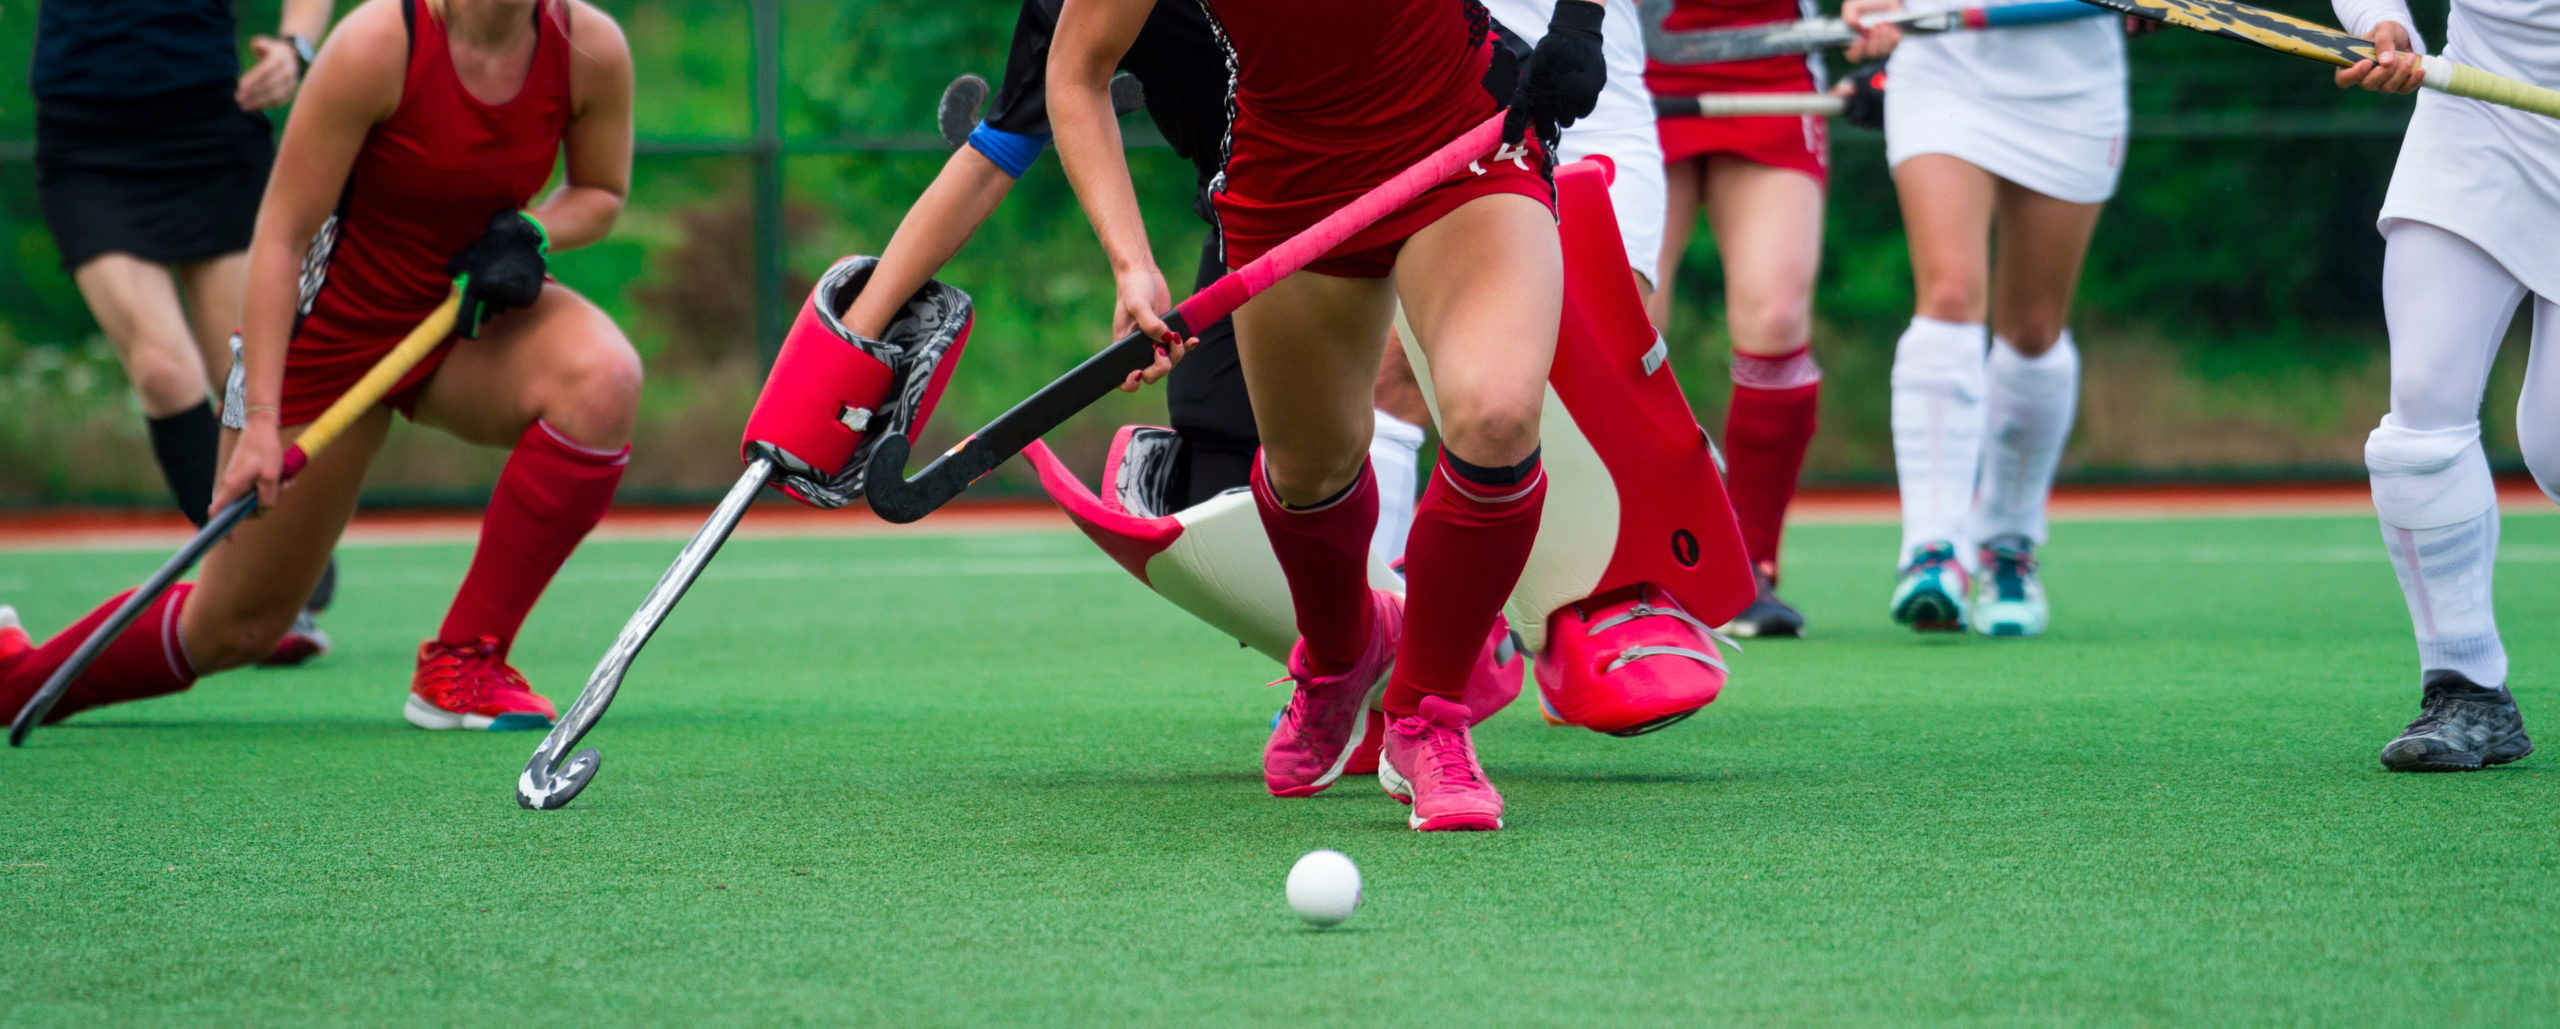 Women’s field hockey players in white and red uniforms are playing and the red player has the ball. 